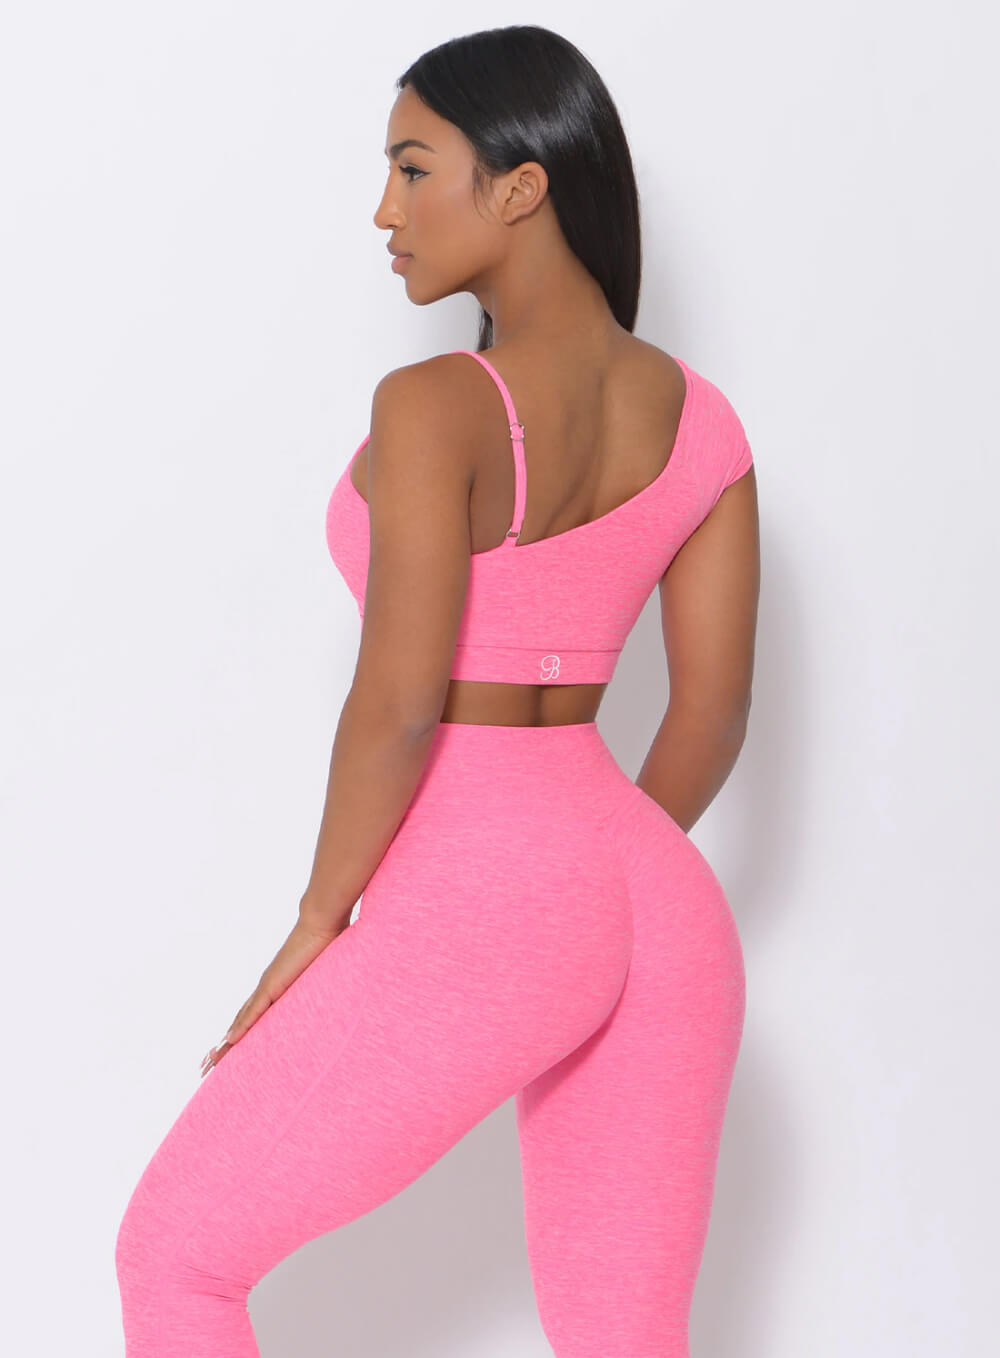 Left side view of the model wearing our Adore Sports Bra in pink and a matching leggings